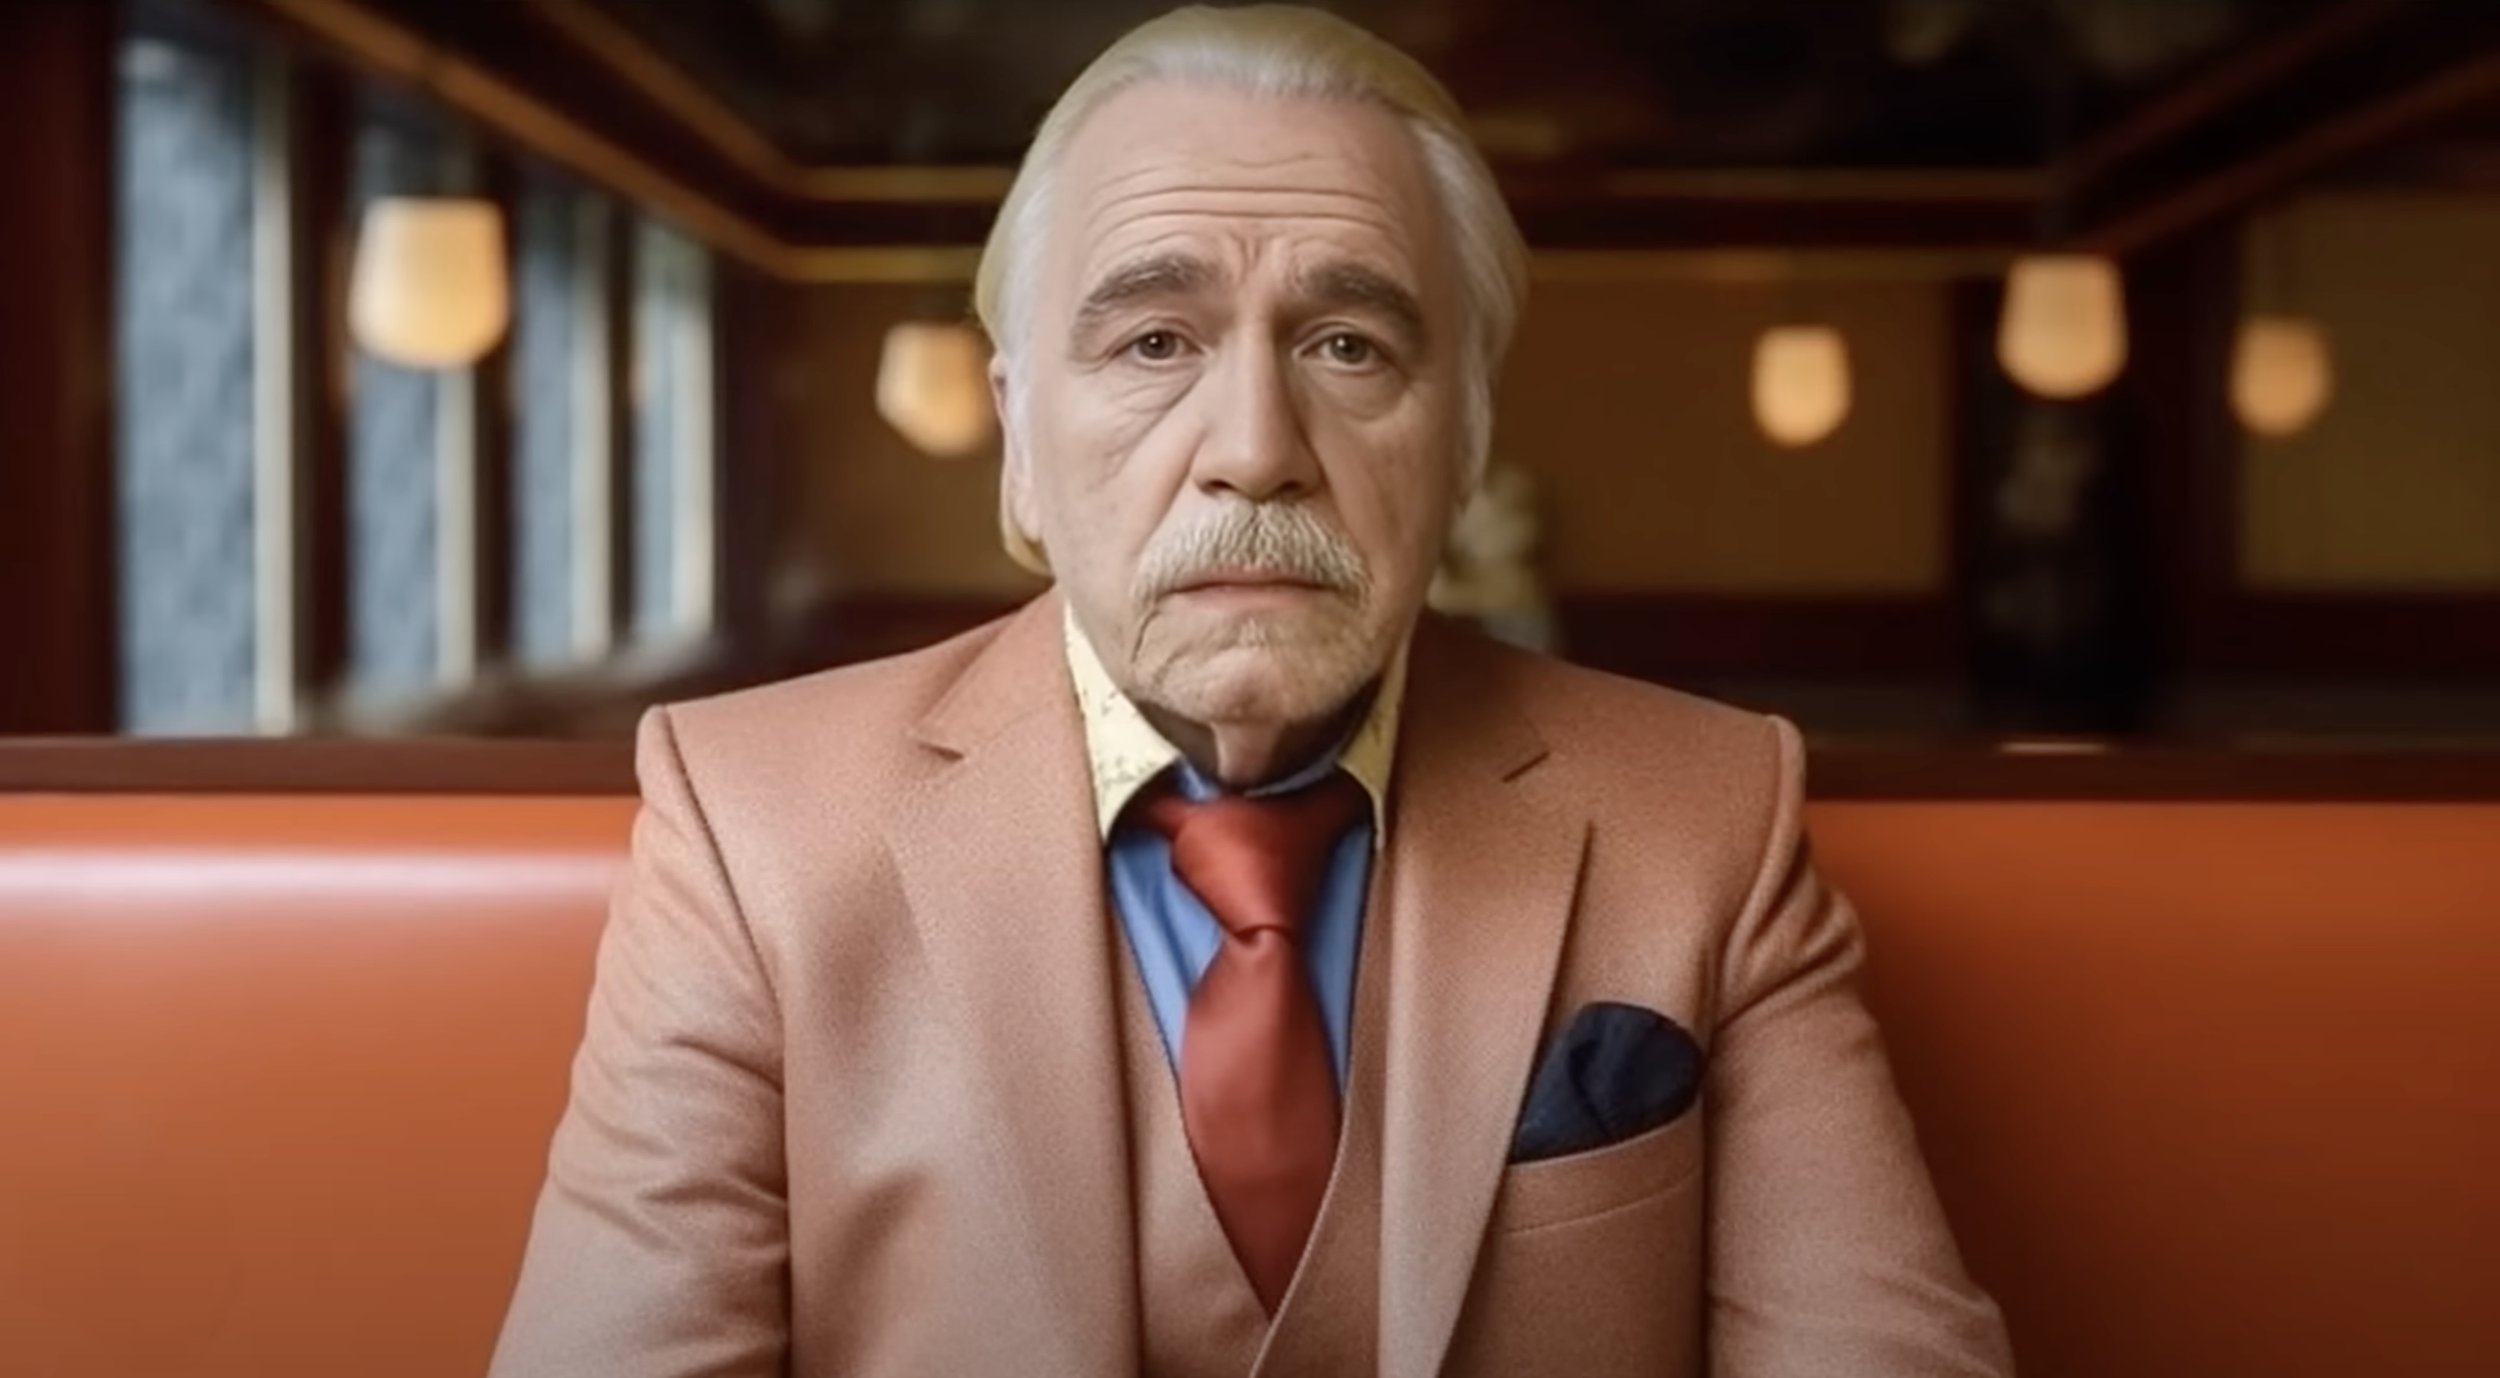 SUCCESSION Reimagined in the Style of Wes Anderson's THE ROYAL